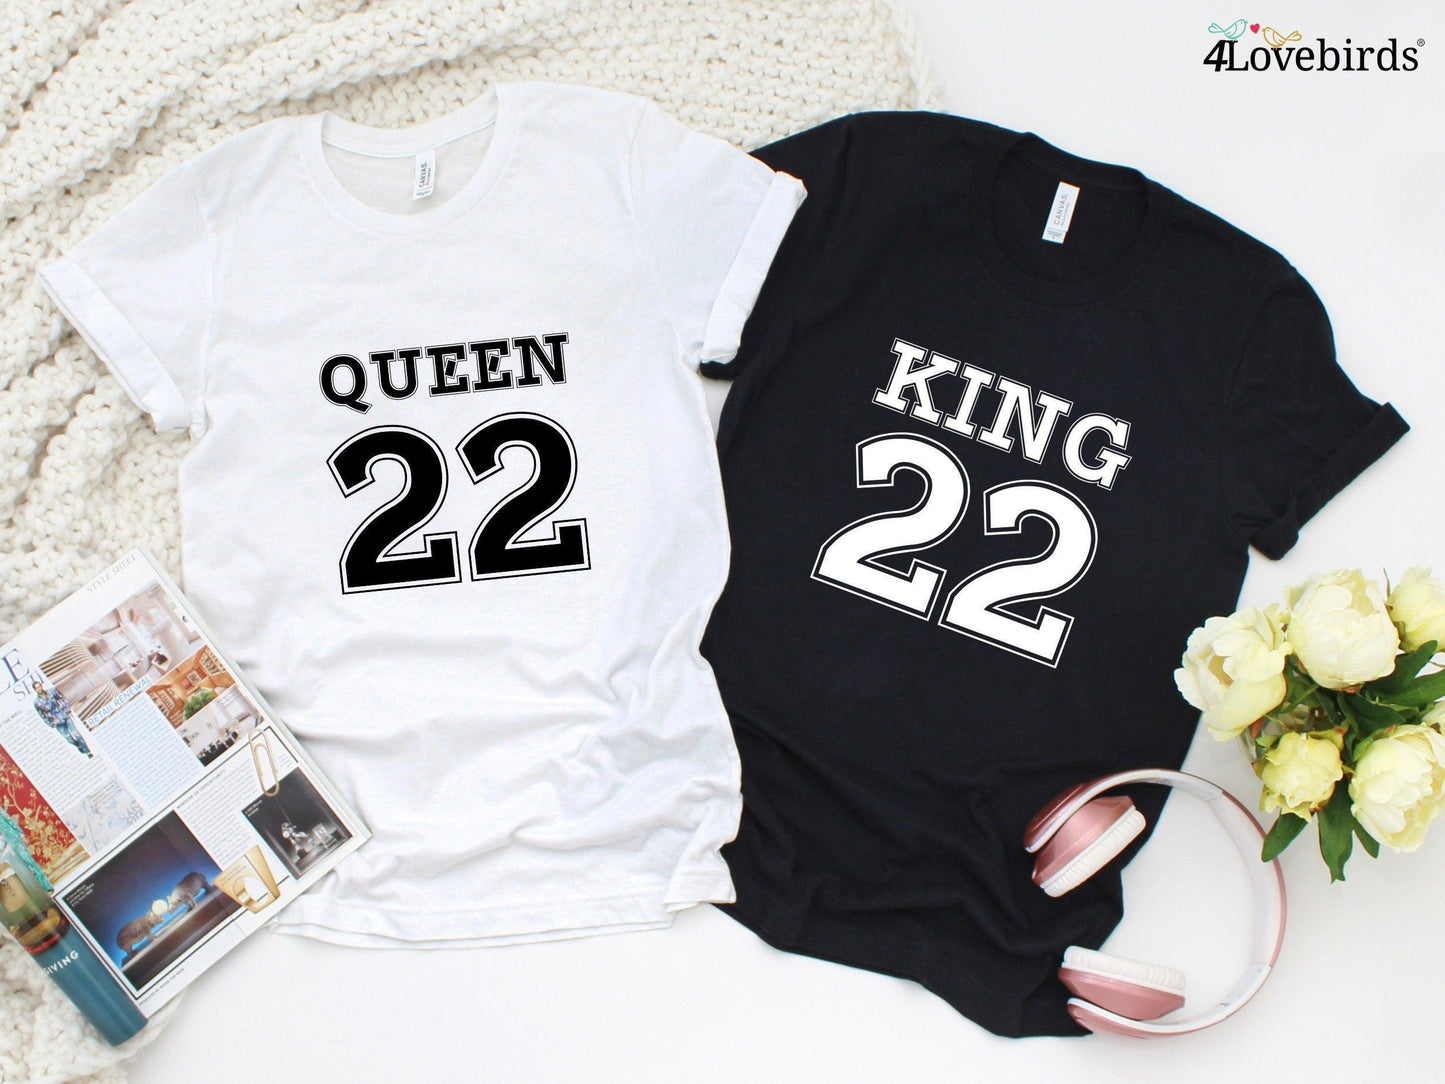 King Queen Hoodie, personalized gift, matching sweatshirts for couple, t-shirts for lovers, King Queen Long Sleeve Shirt for couple - 4Lovebirds